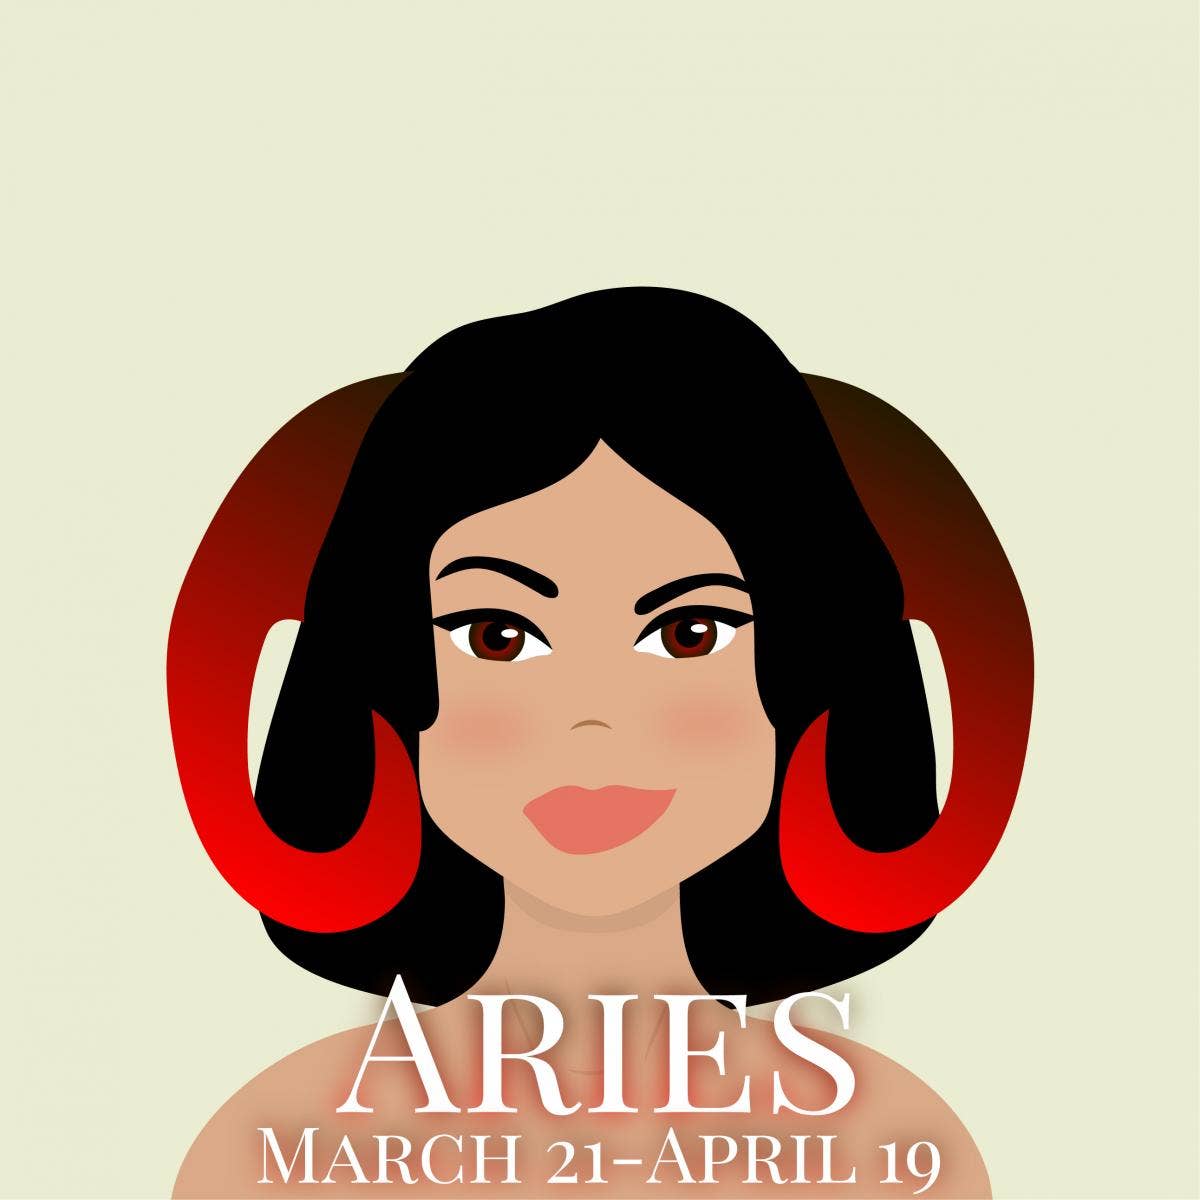 ARIES (March 21 - April 19)